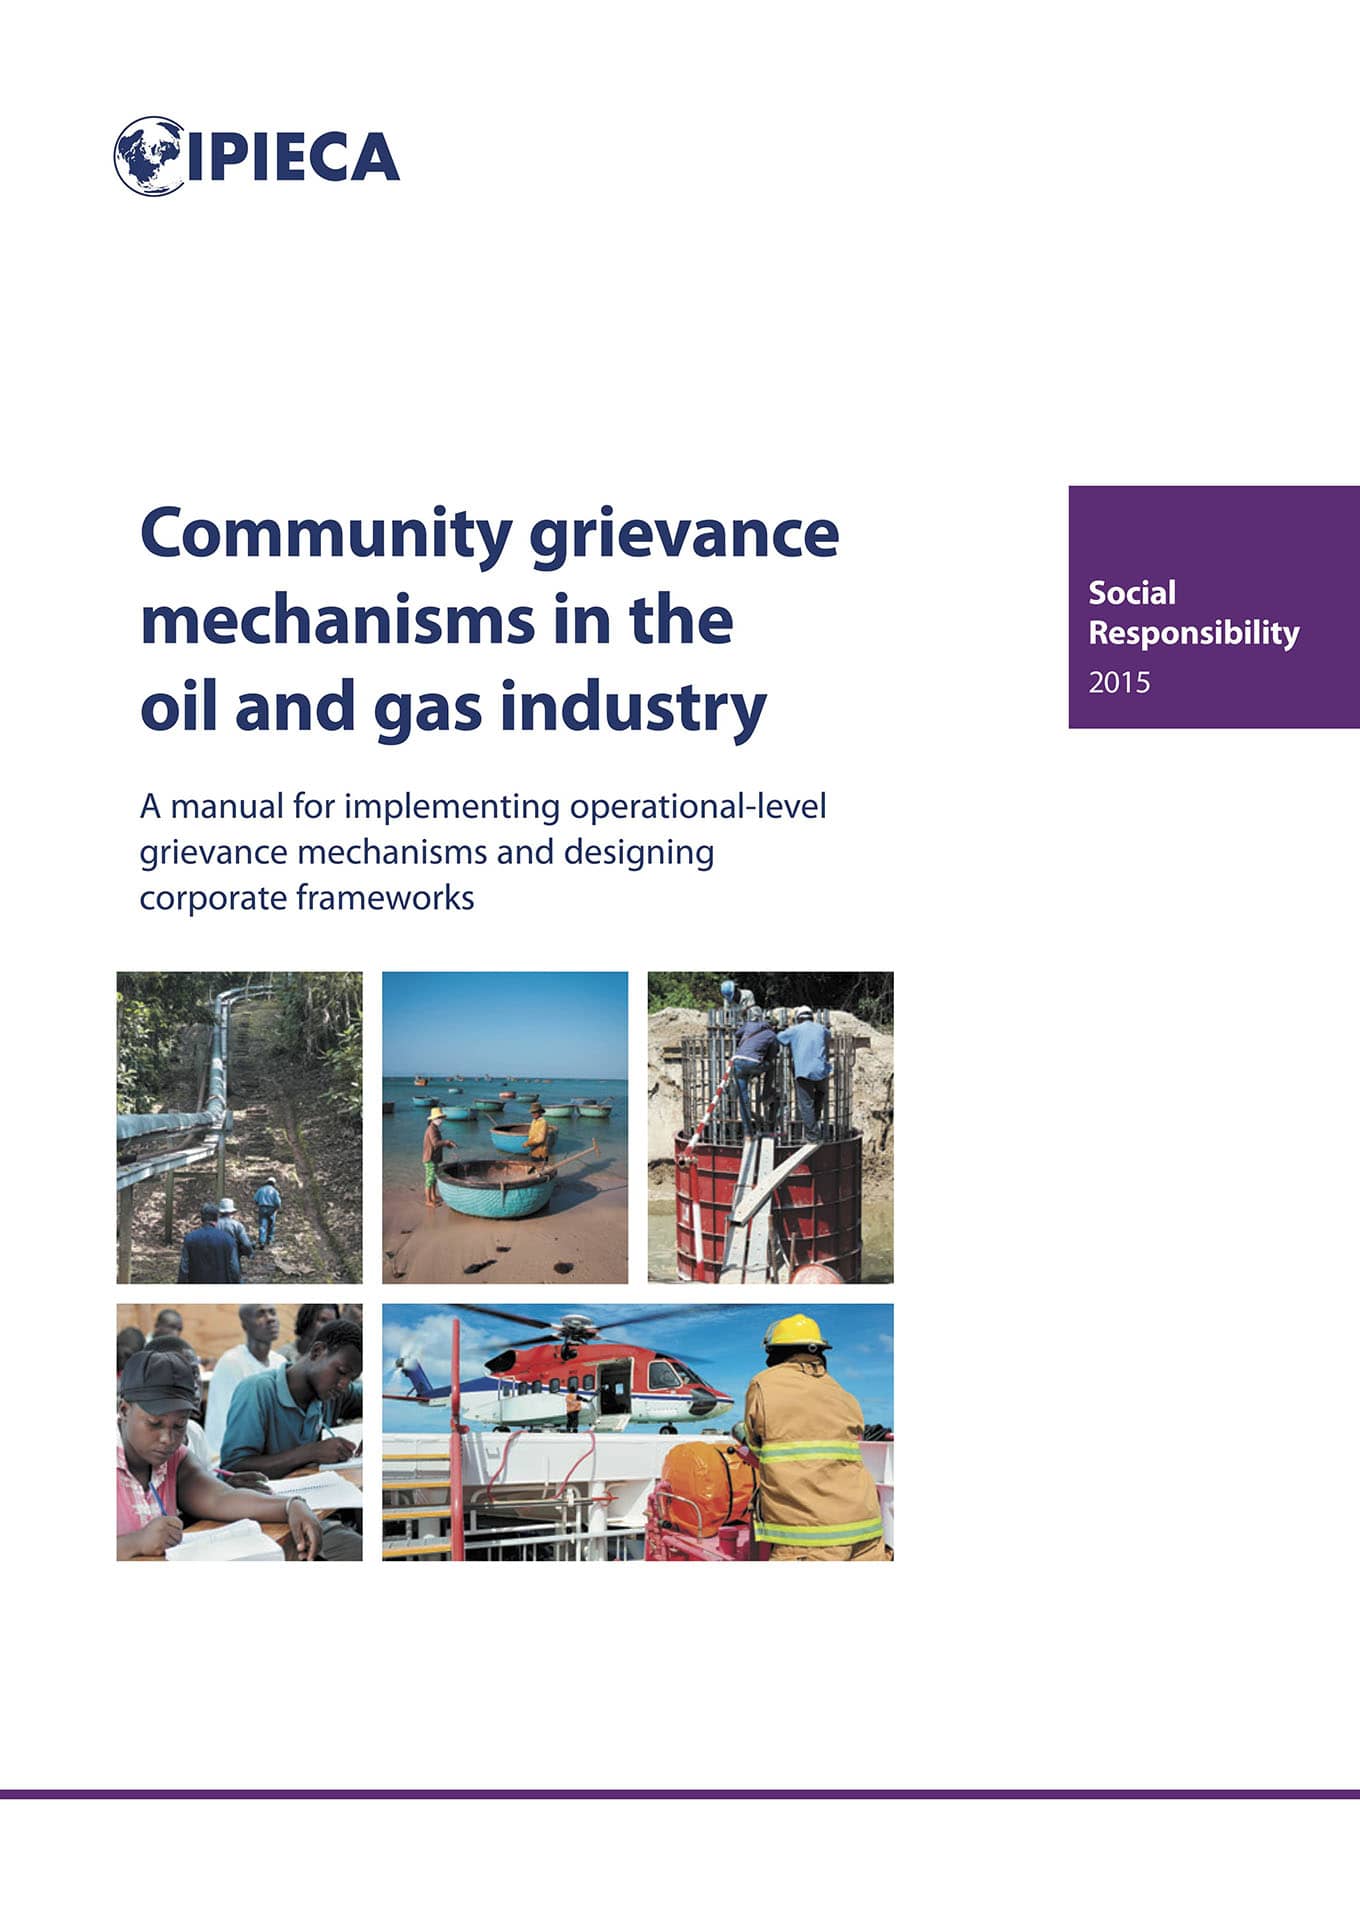 Community grievance mechanisms in the oil and gas industry (IPIECA, 2015)